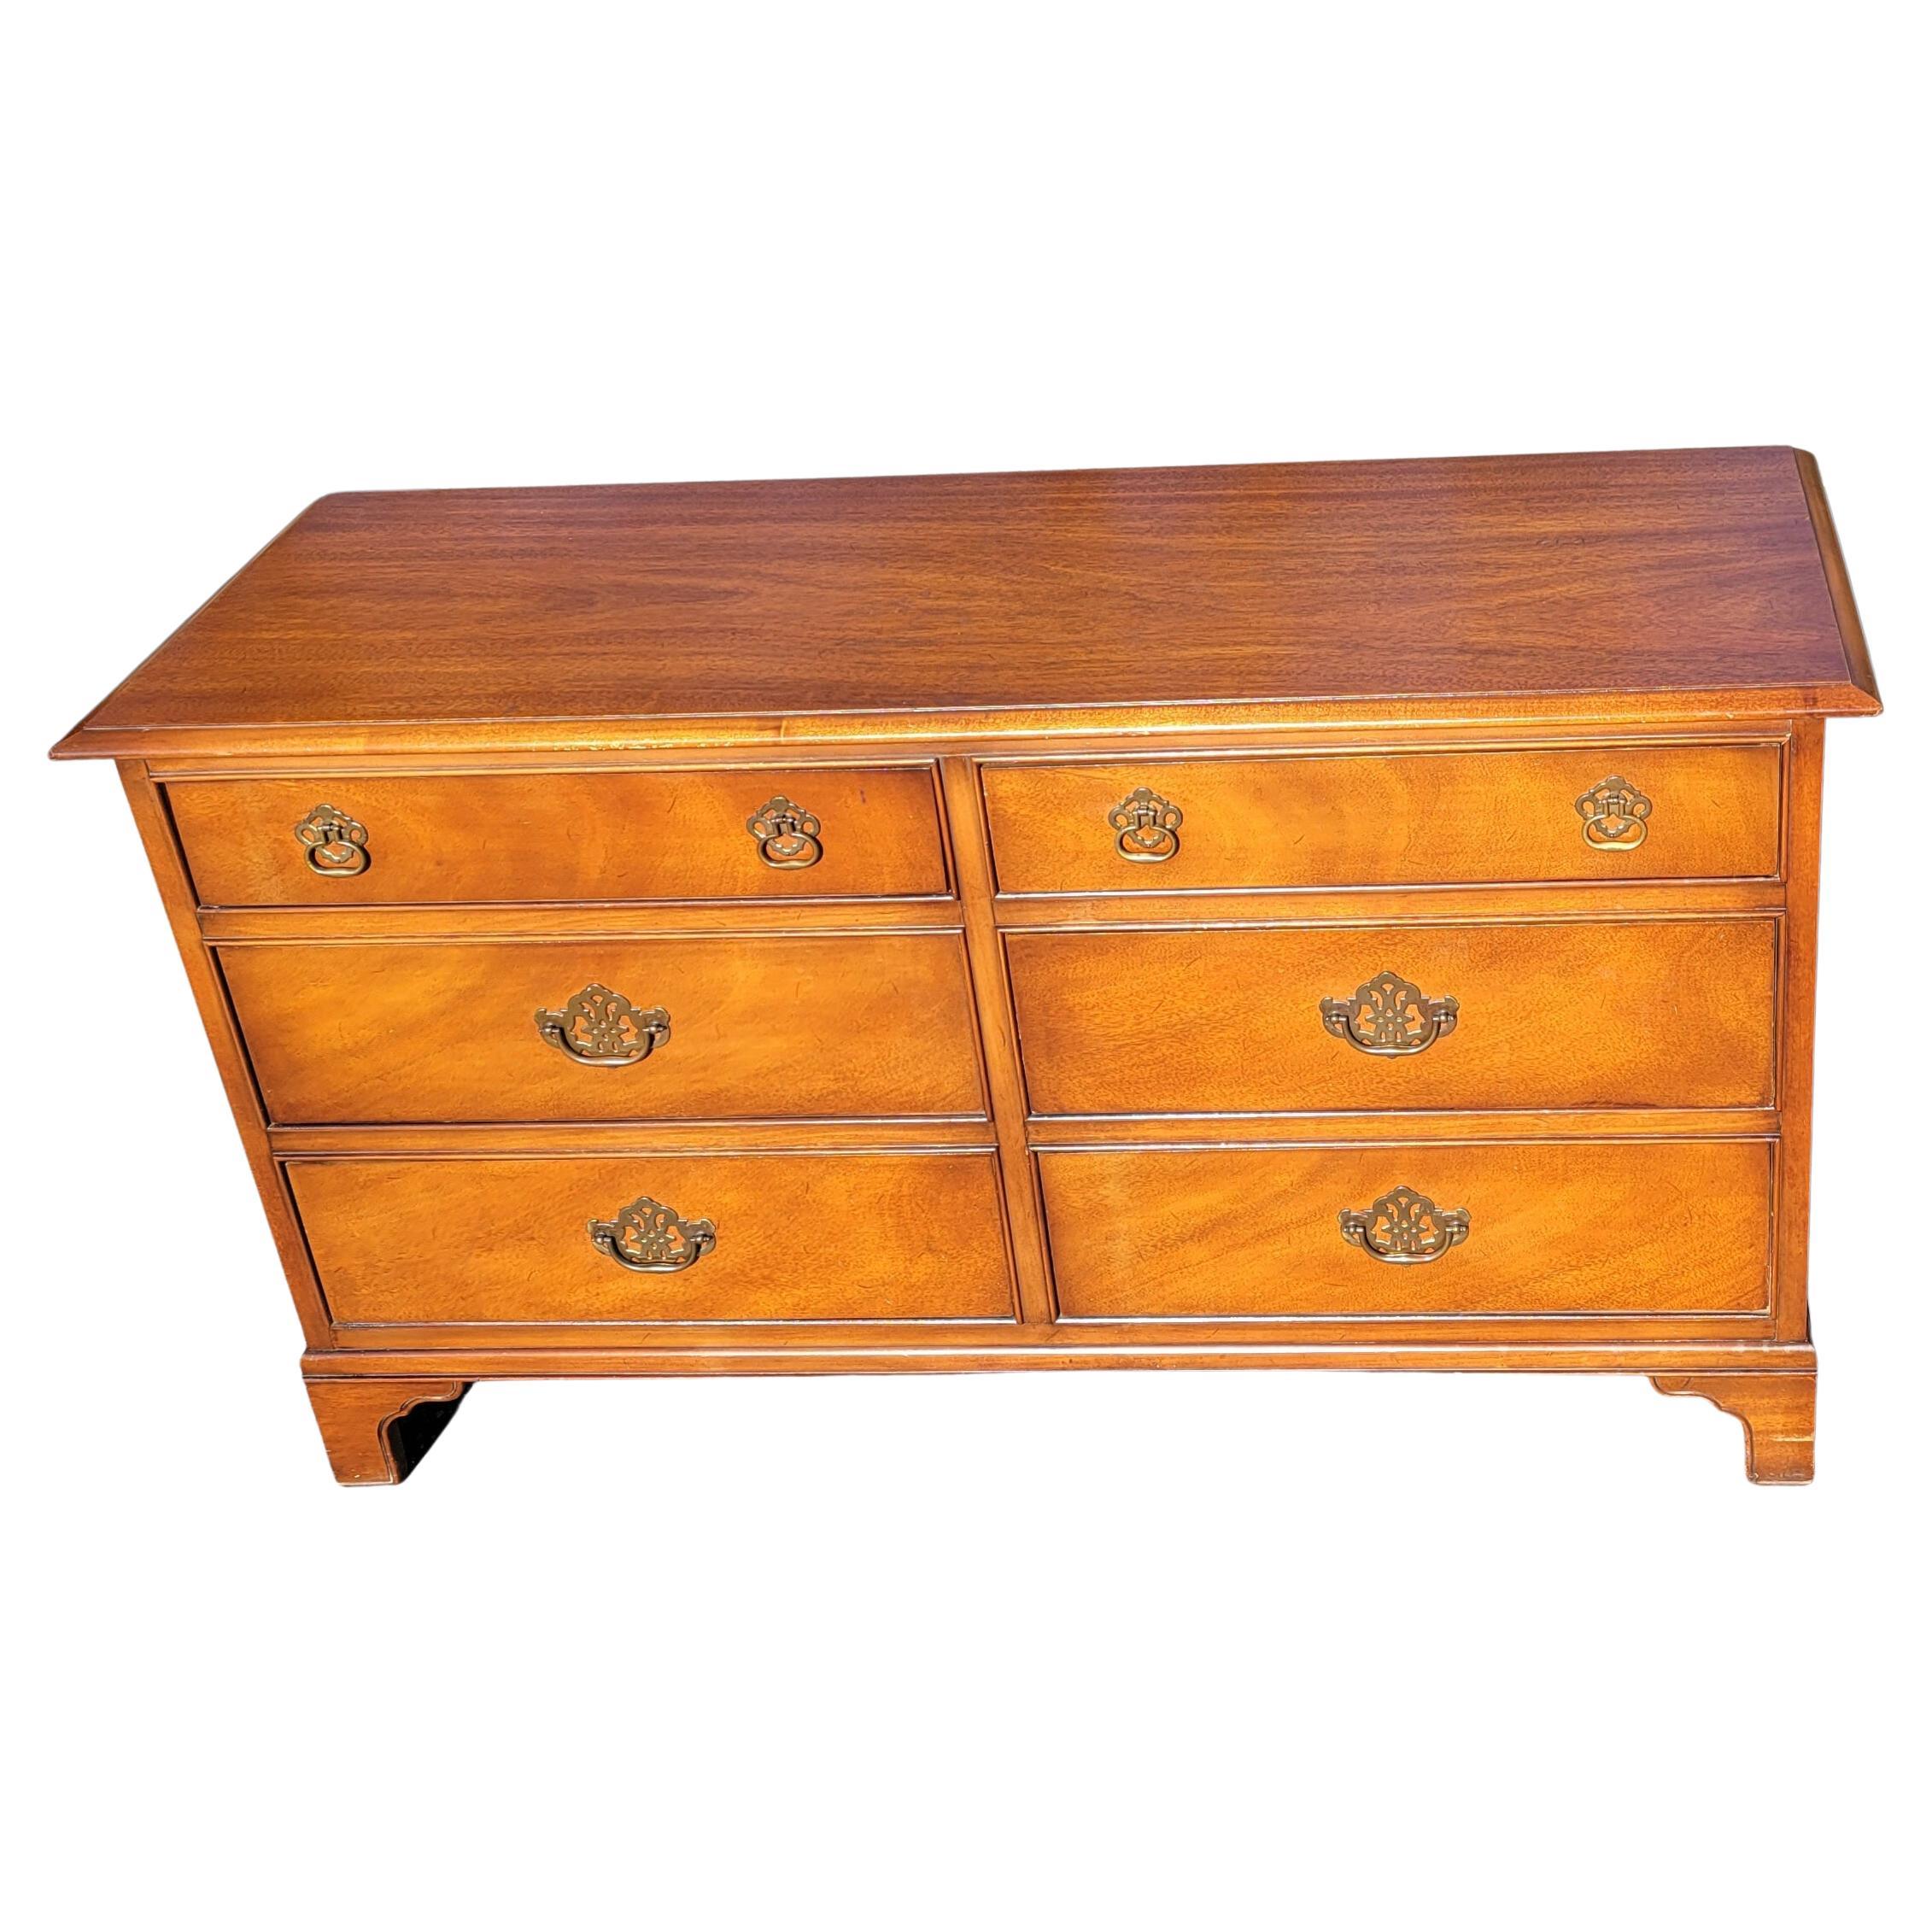 1960s Drexel Solid Genuine Cherry Chippendale double dresser. 6 dovetail joints drawers perfectly functioning, one of which are divided. 
Clean vintage with wear cinsistent with age and use. Measures 56